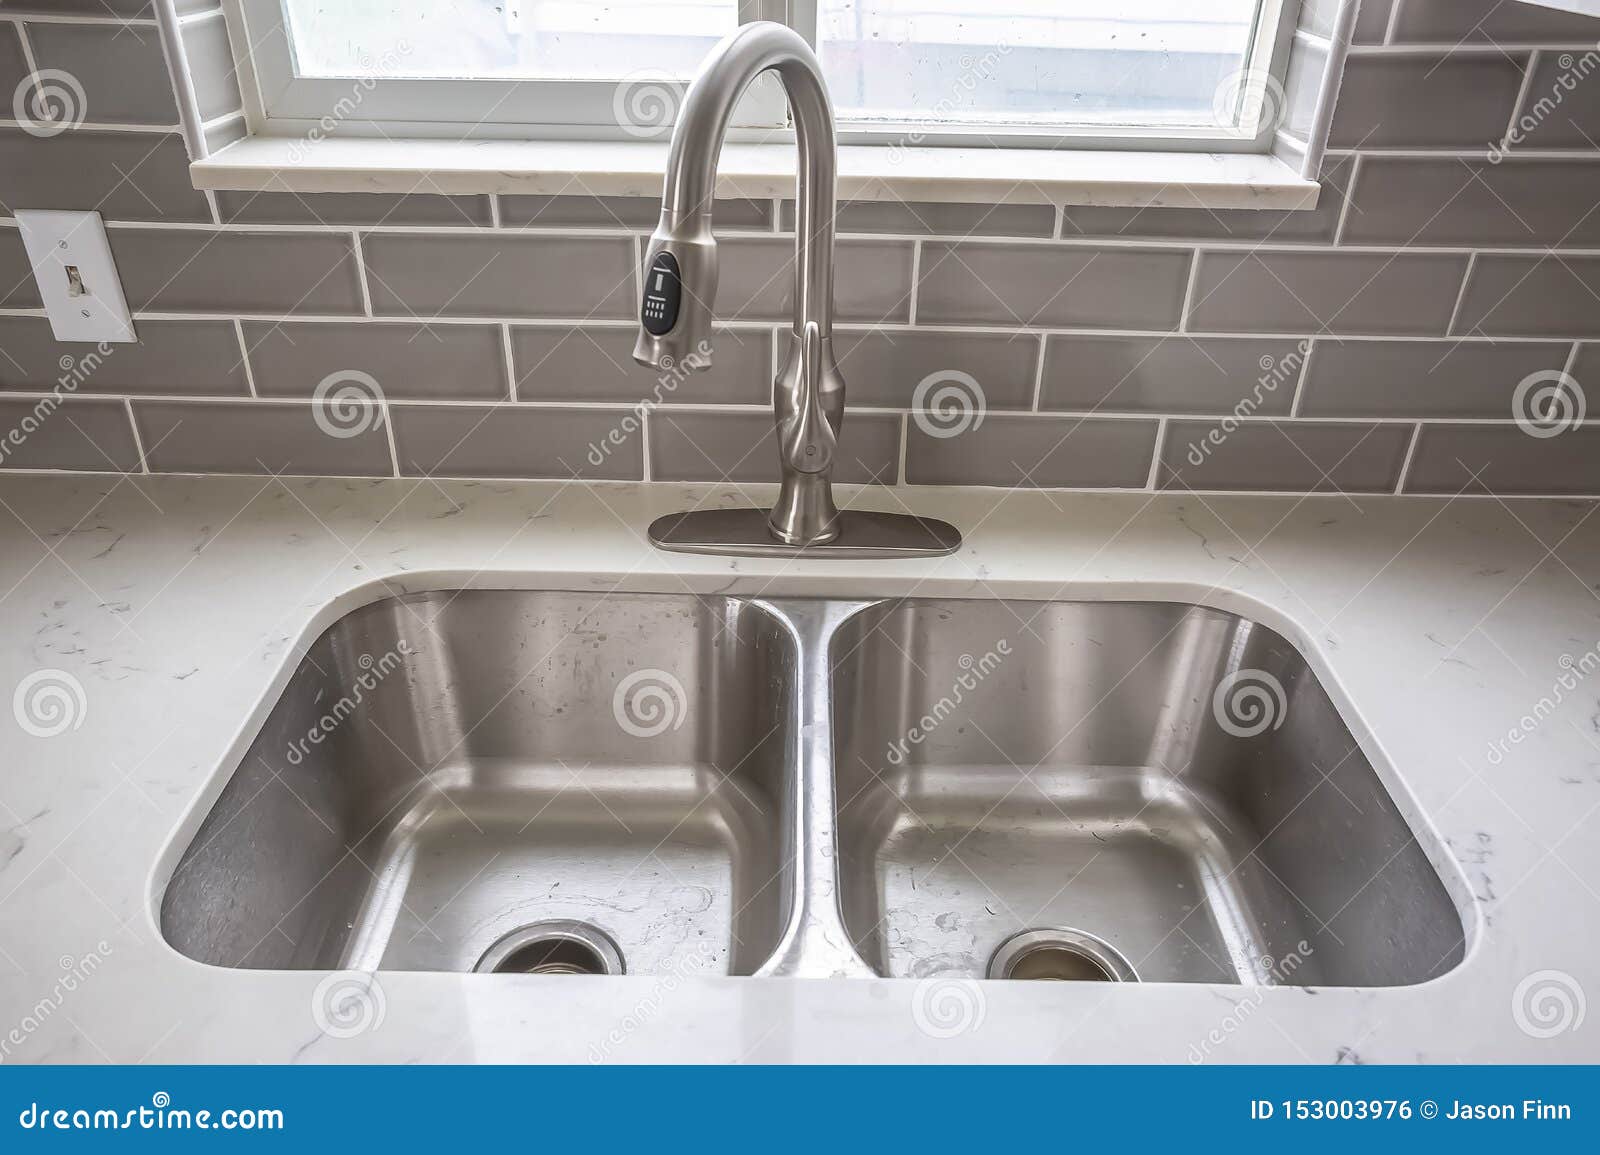 Double Bowl Stainless Steel Sink Undermounted on the White Kitchen ...